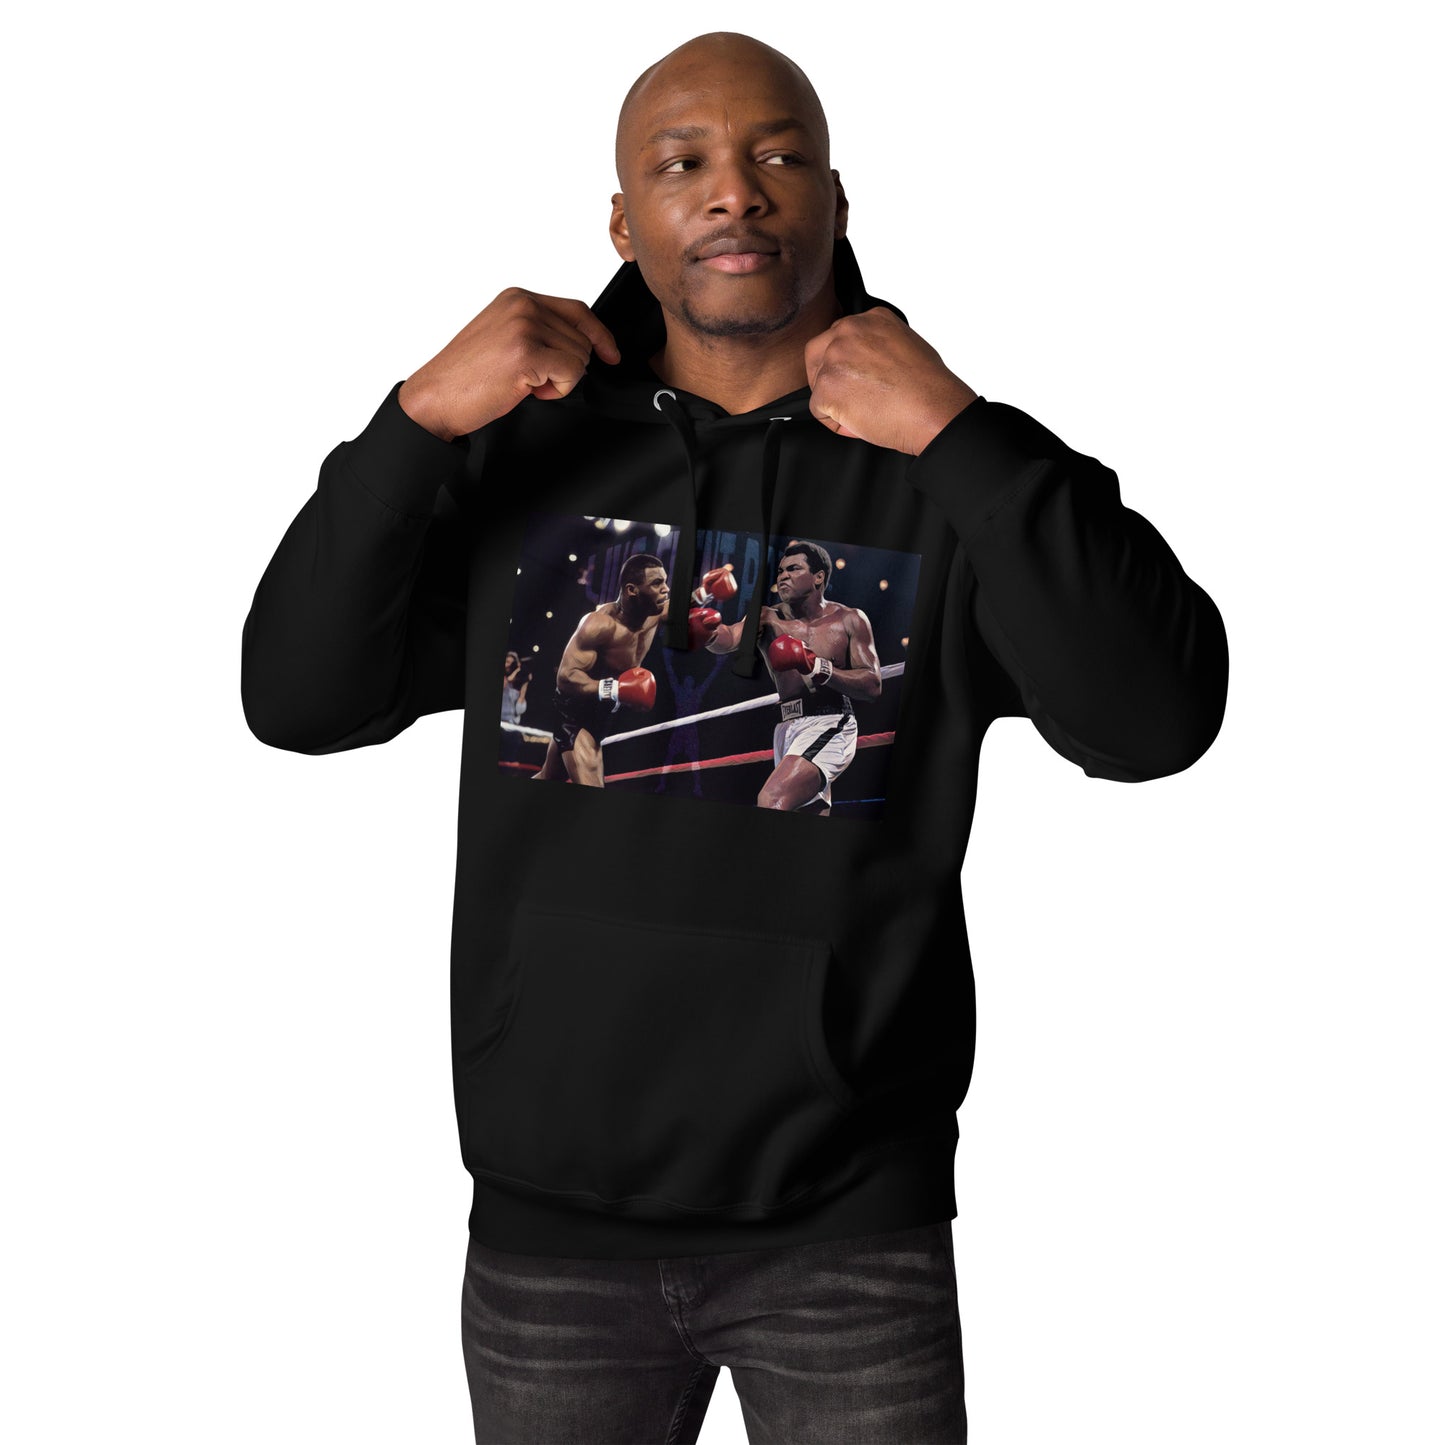 "URise Together" Boxing ICON Hoodie with White Shoulder Logo - Black